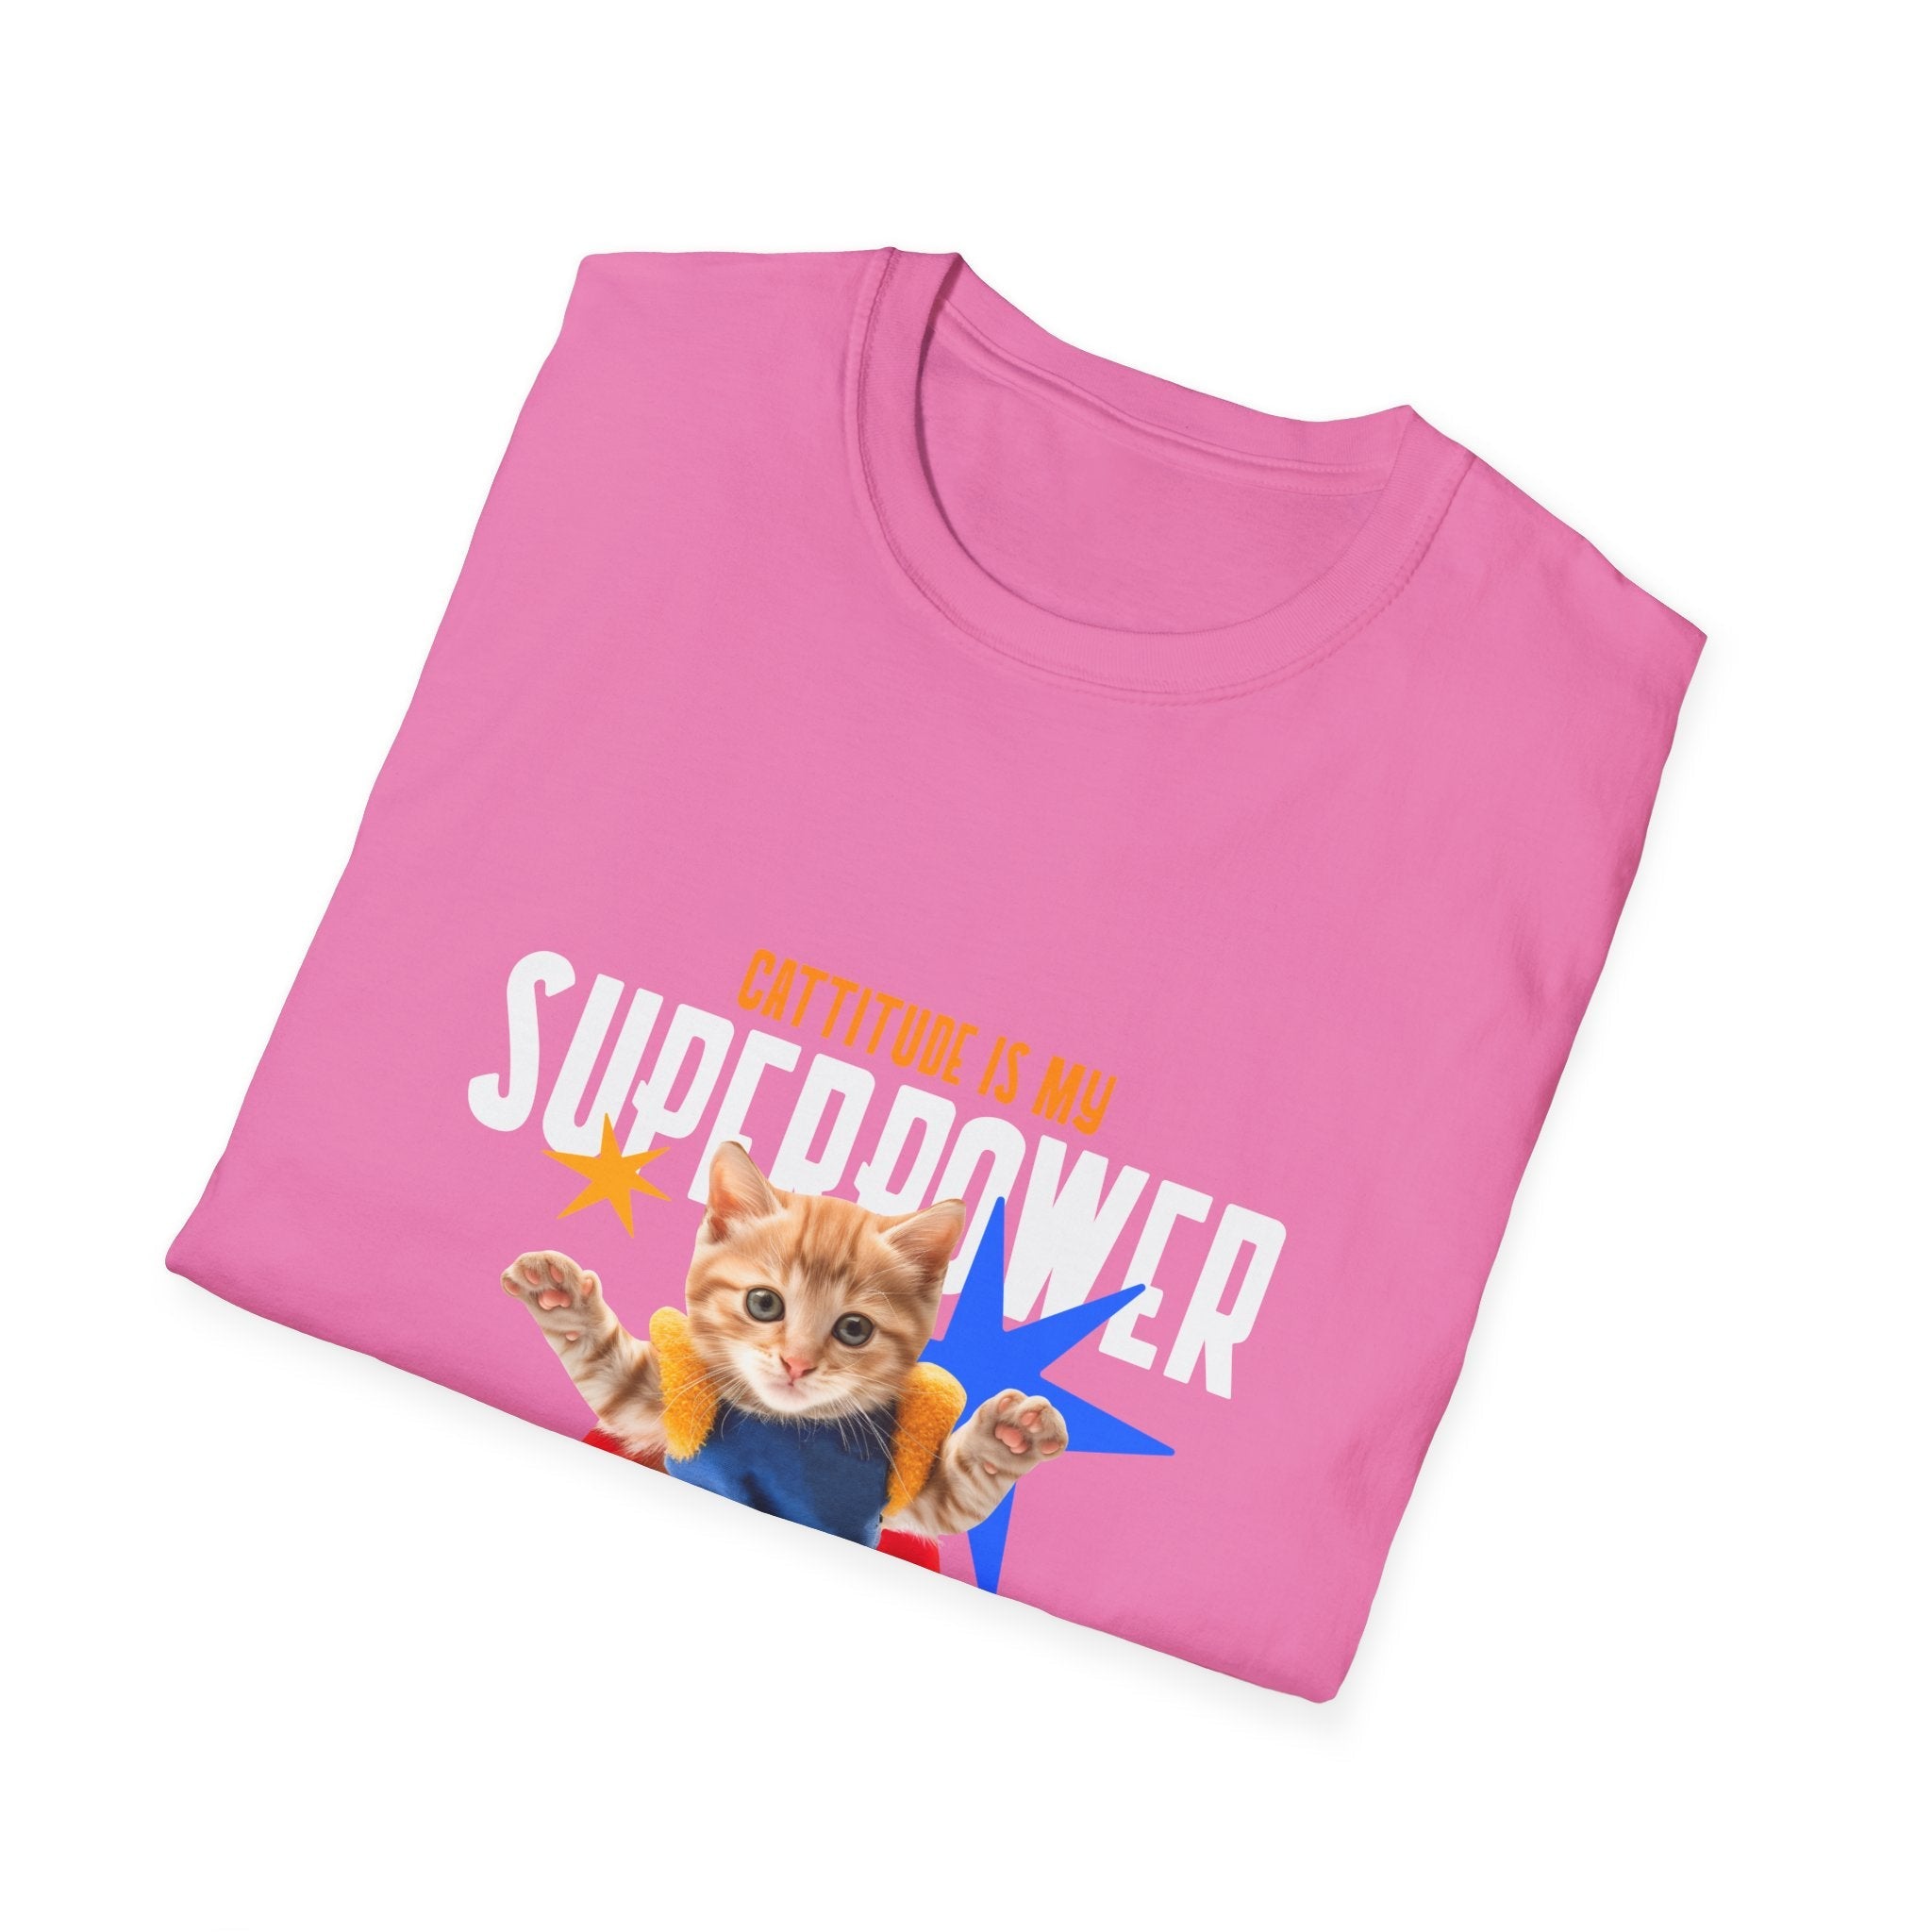 Cattitude is My Superpower T-Shirt